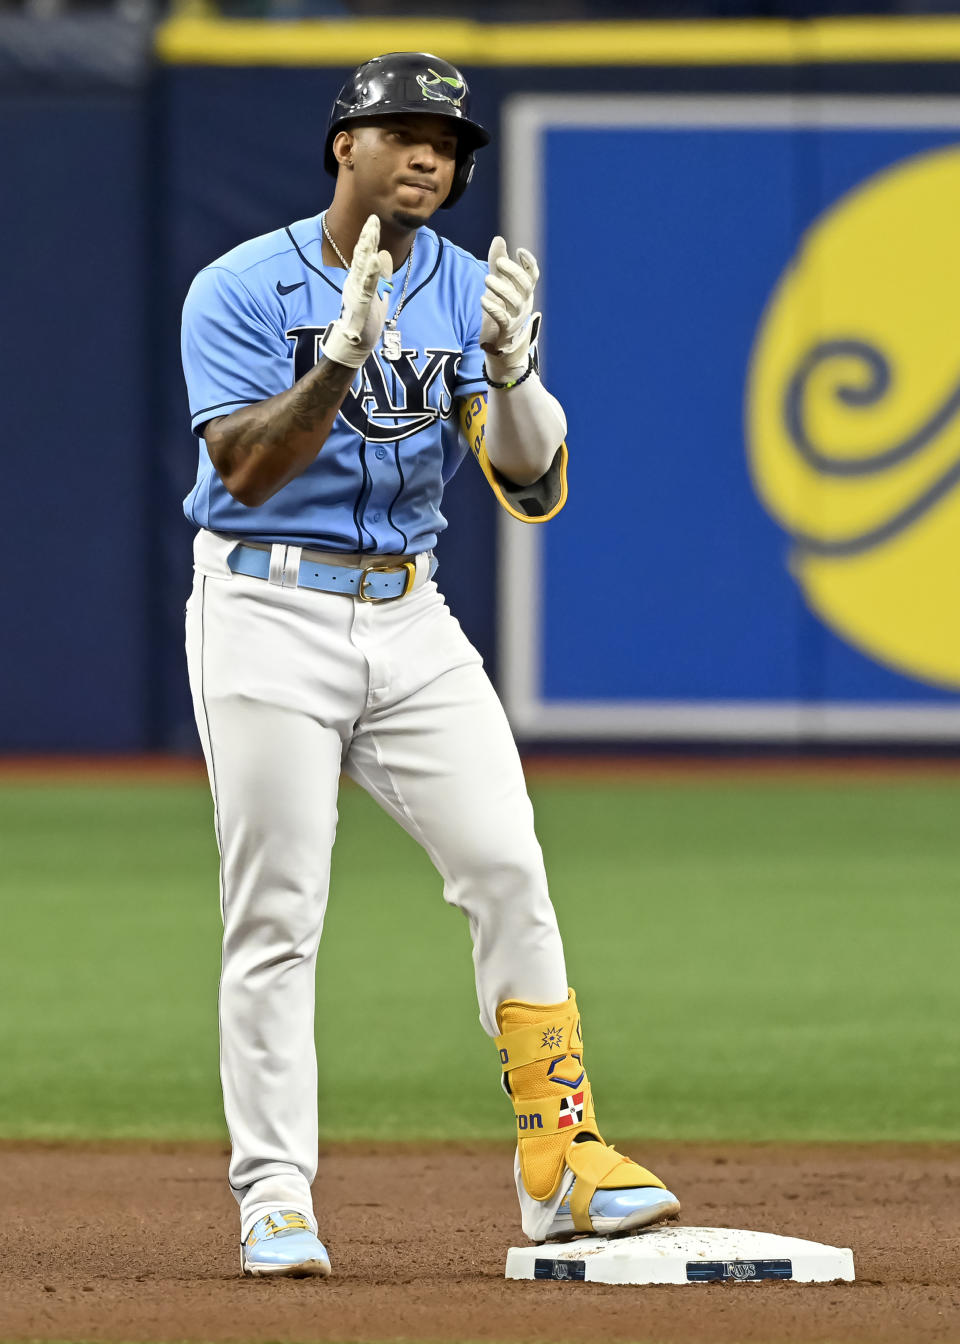 Tampa Bay Rays' Wander Franco claps on second base after hitting a double off Miami Marlins starter Jesus Luzardo during the first inning of a baseball game Sunday, Sept. 26, 2021, in St. Petersburg, Fla. Franco extended his on-base consecutive game streak to 41. (AP Photo/Steve Nesius)